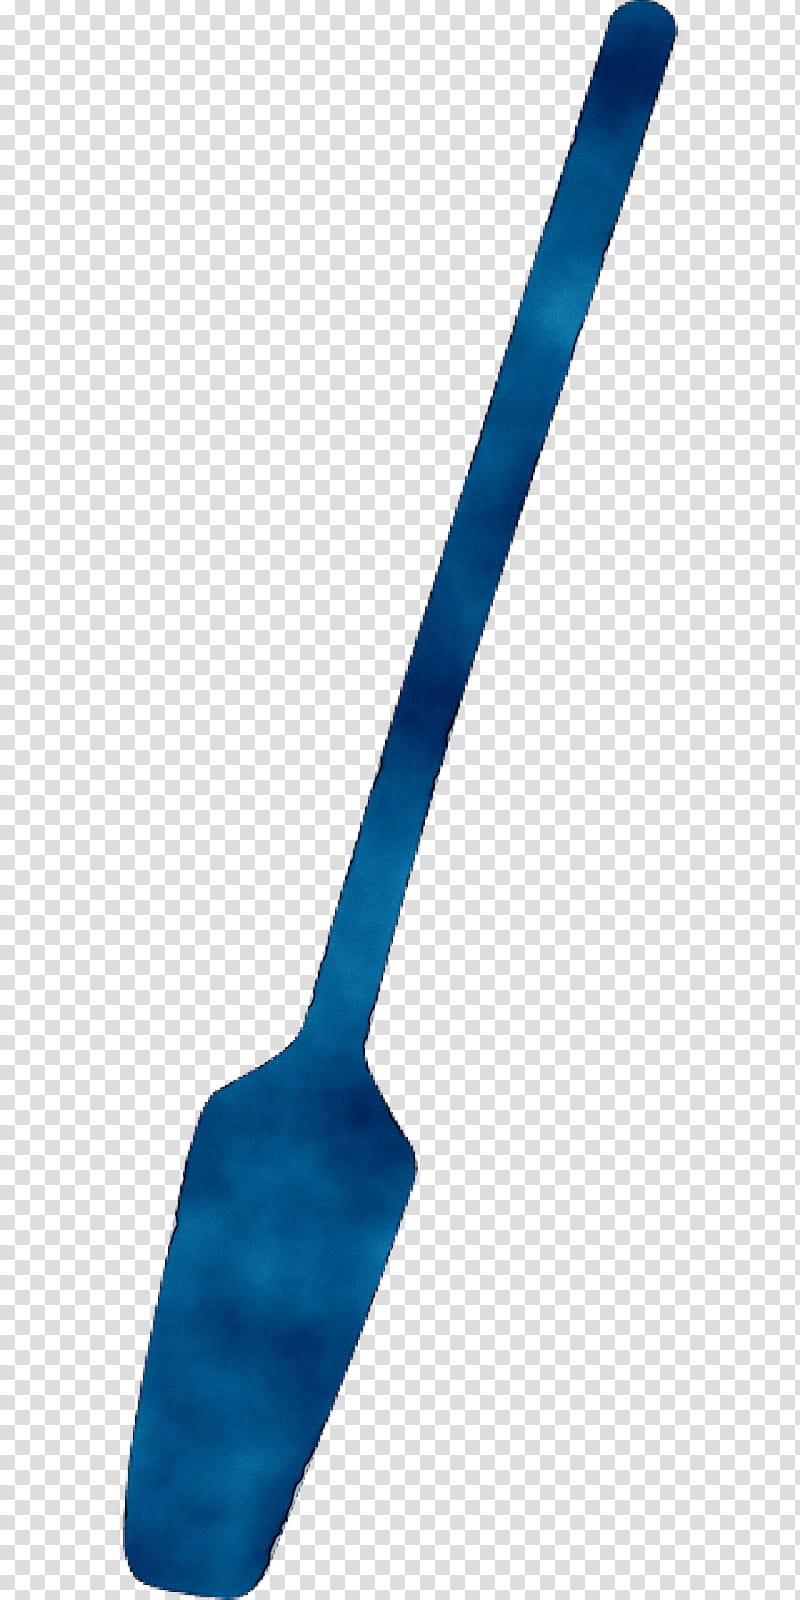 Kitchen, Kitchen Scrapers, Blue, Turquoise, Spatula, Spoon, Kitchen Utensil, Tool transparent background PNG clipart